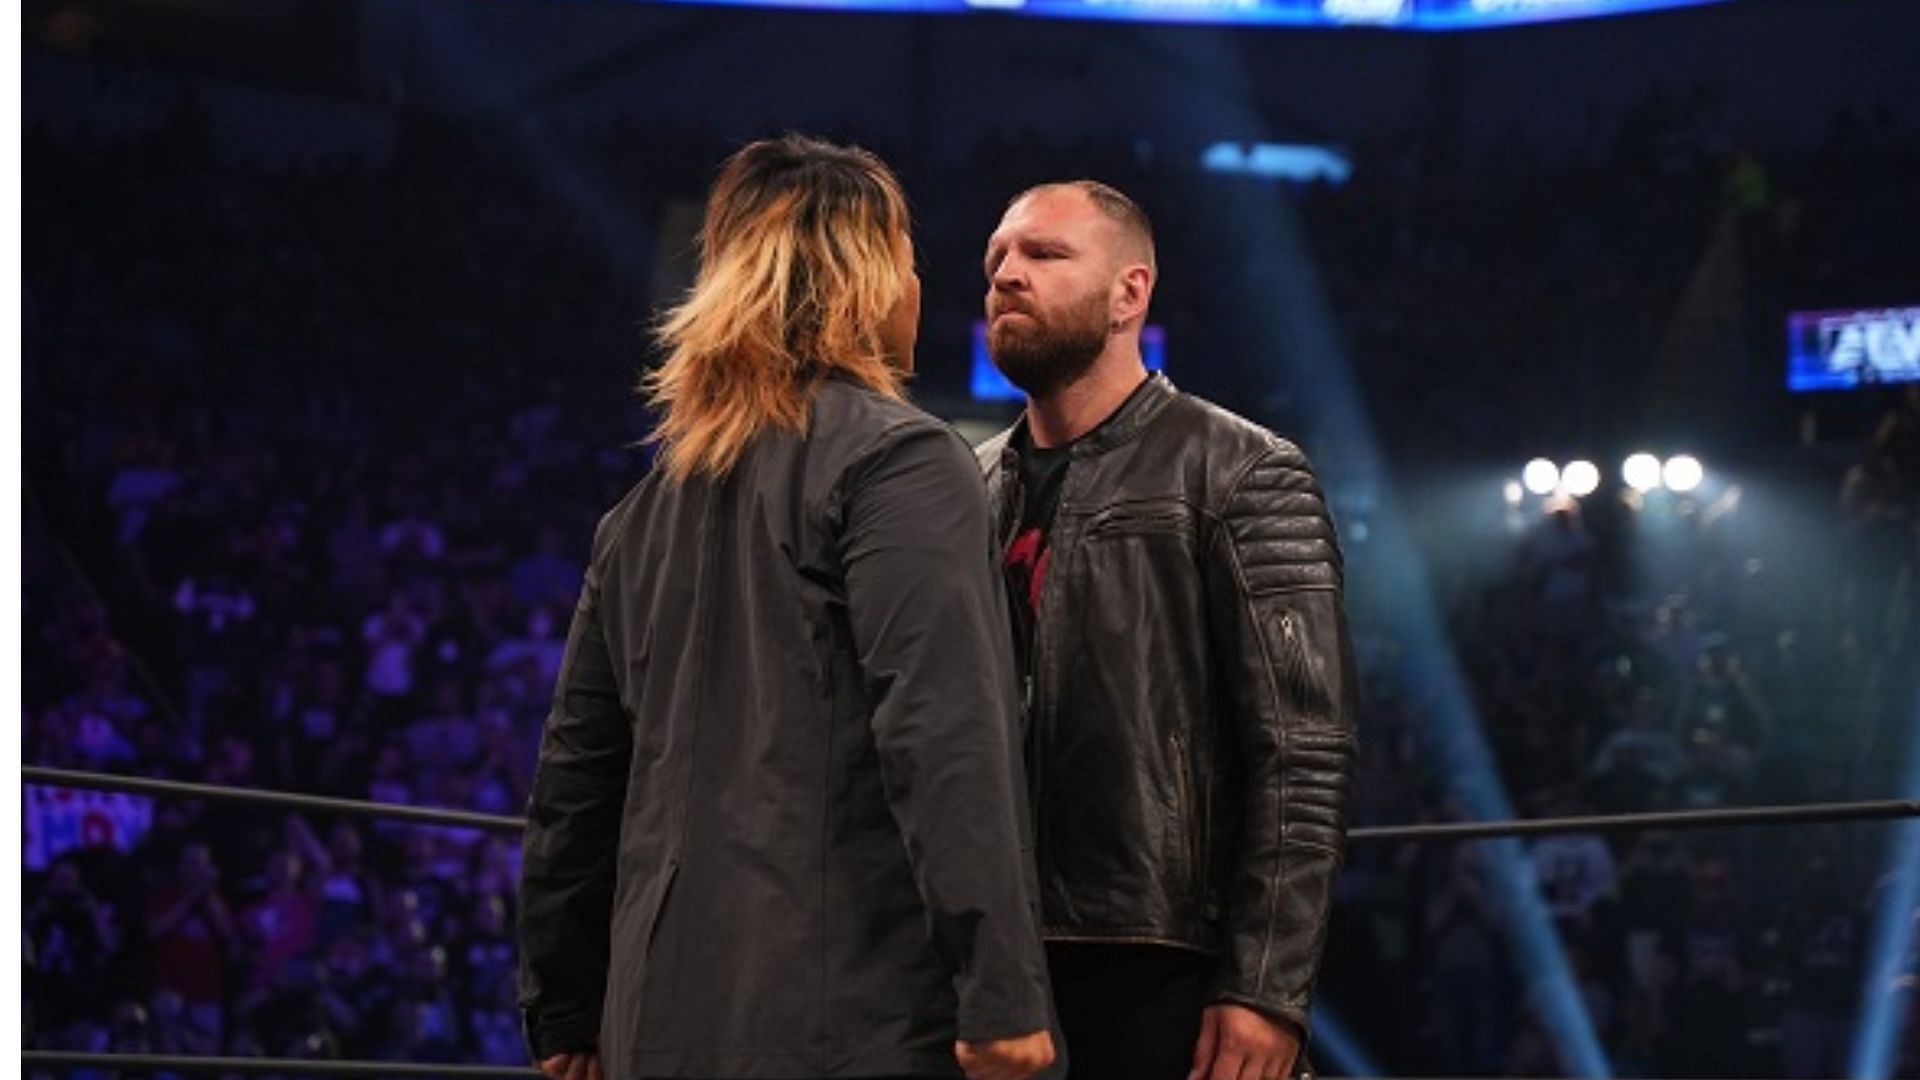 Jon Moxley and Tanahashi will meet for the Interim AEW title